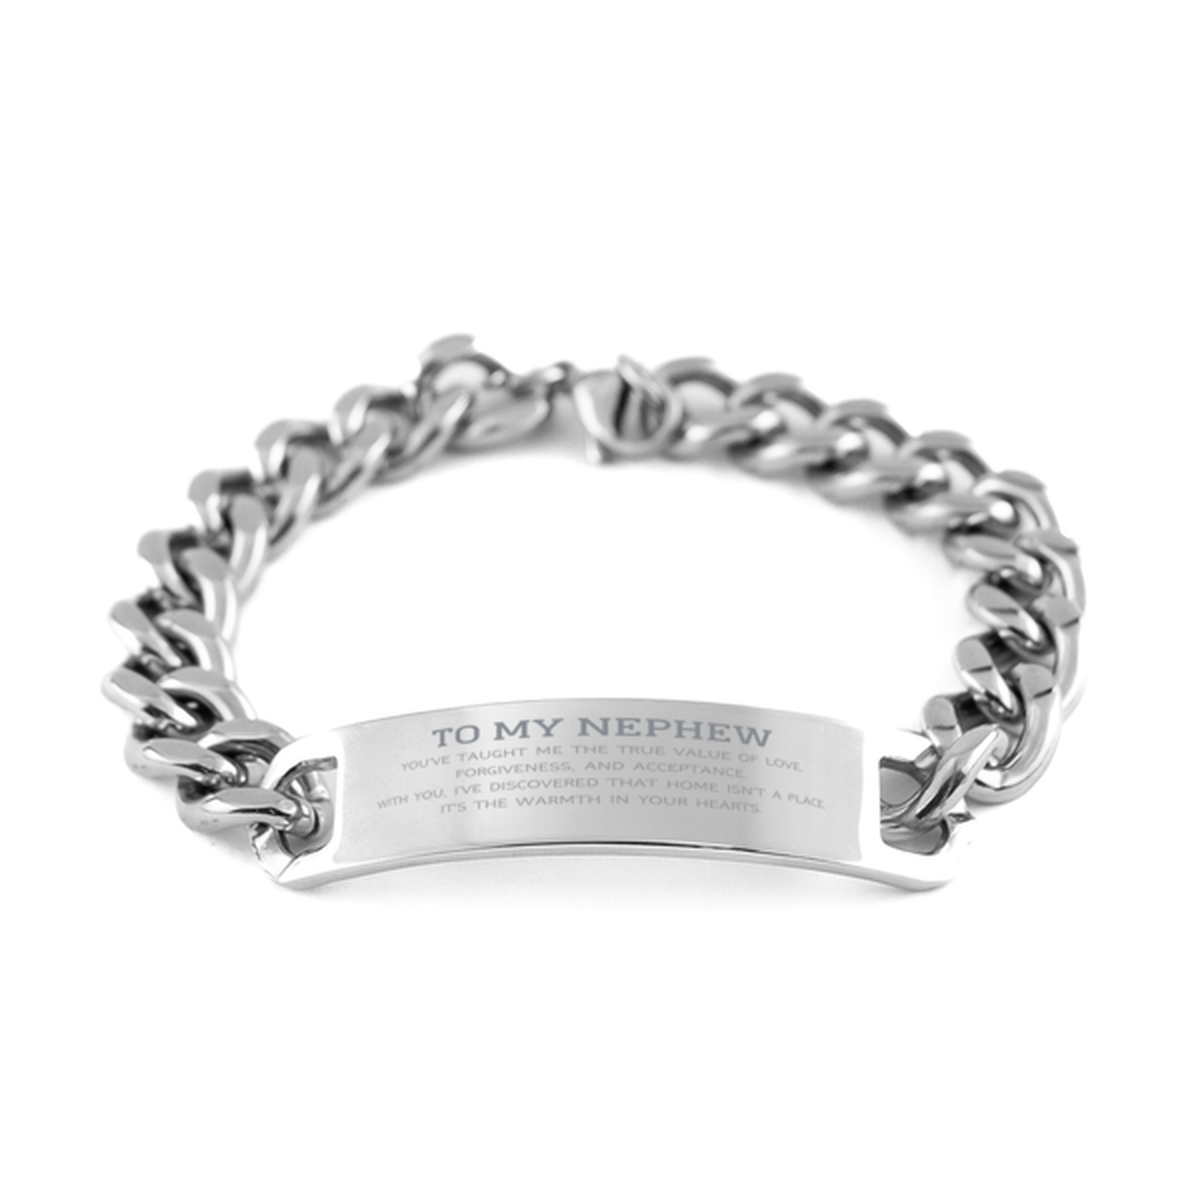 To My Nephew Gifts, You've taught me the true value of love, Thank You Gifts For Nephew, Birthday Cuban Chain Stainless Steel Bracelet For Nephew